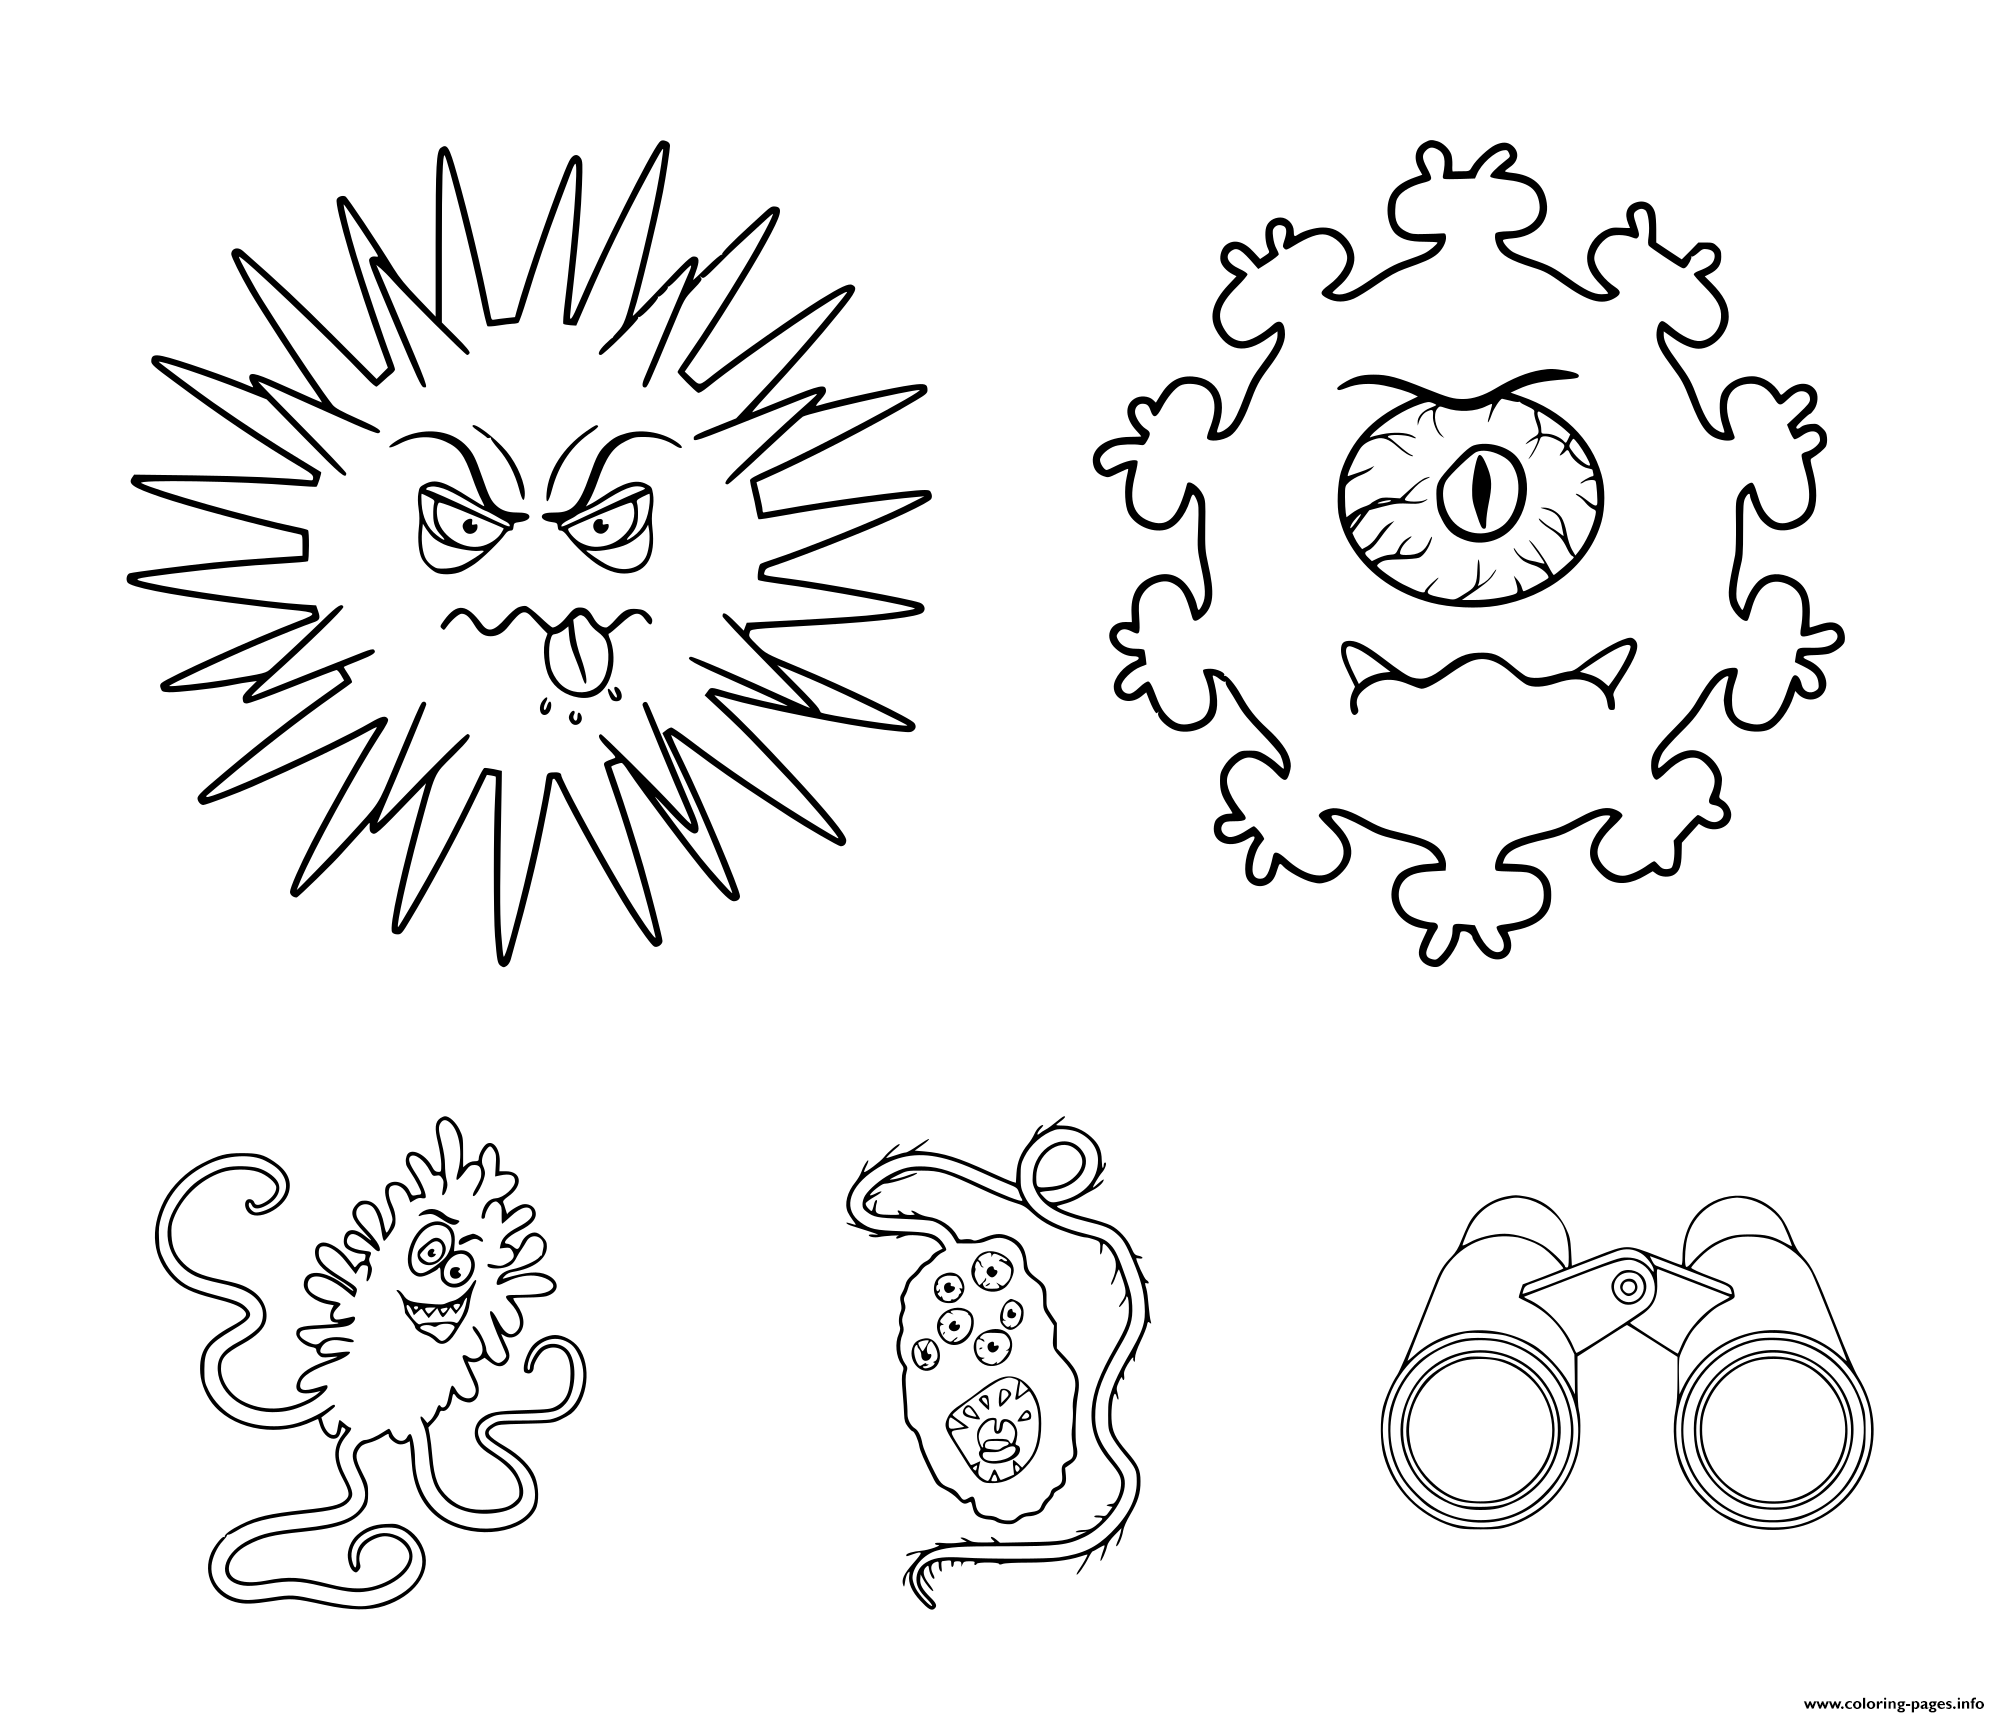 Different Types Of Microbes And Virus Covid 19 Coloring Pages Printable